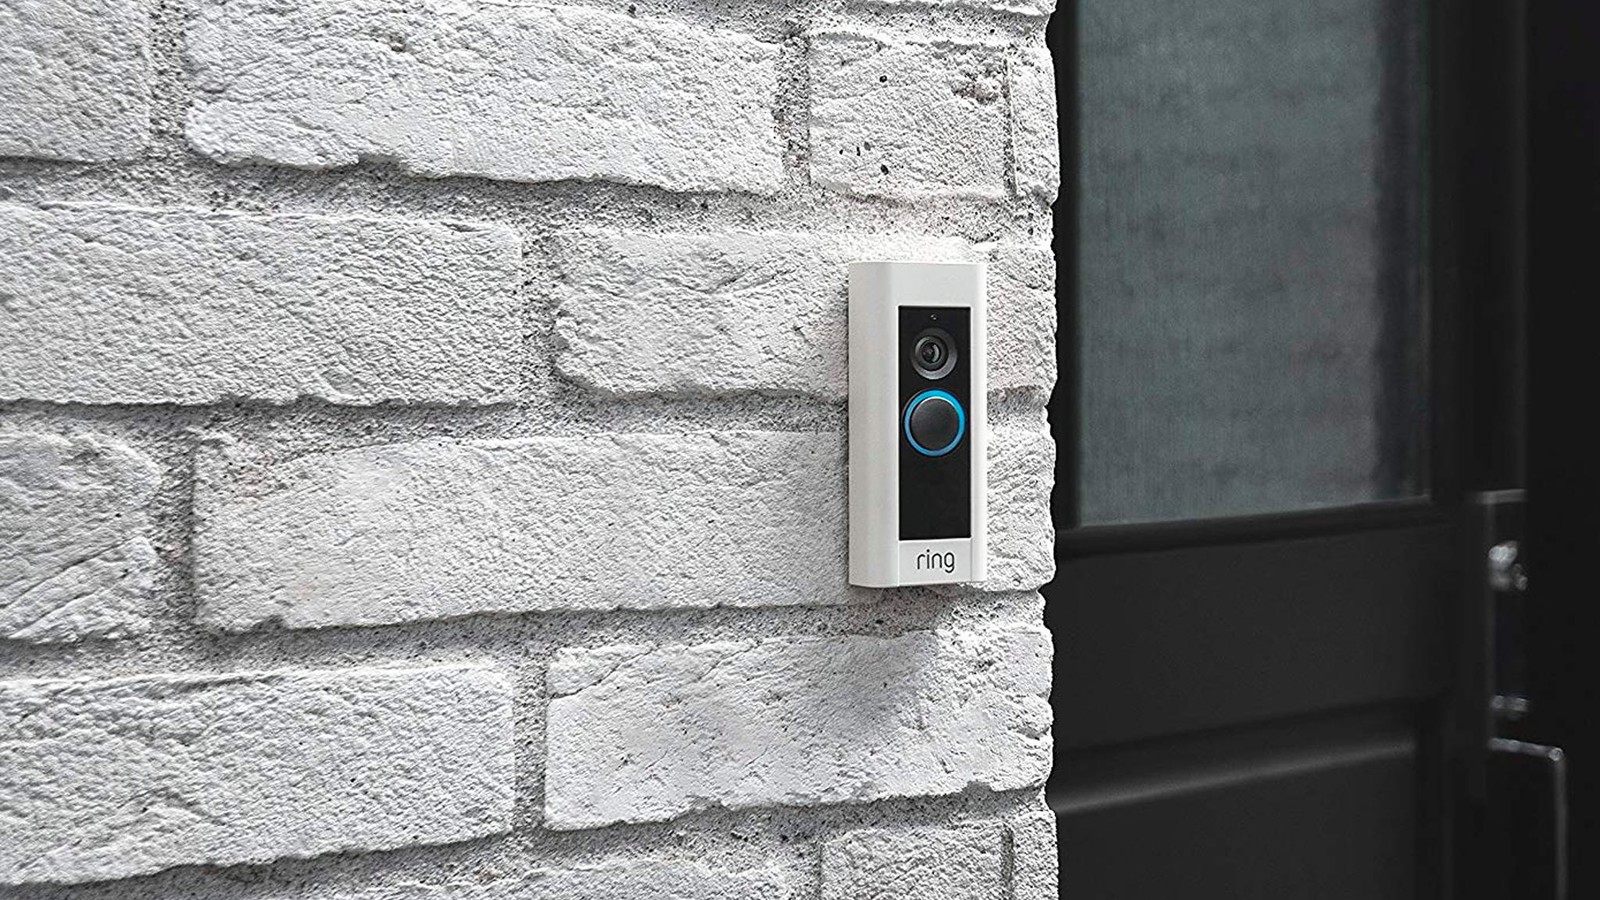 Ring Pro Video Doorbell installed outdoors on a brick wall